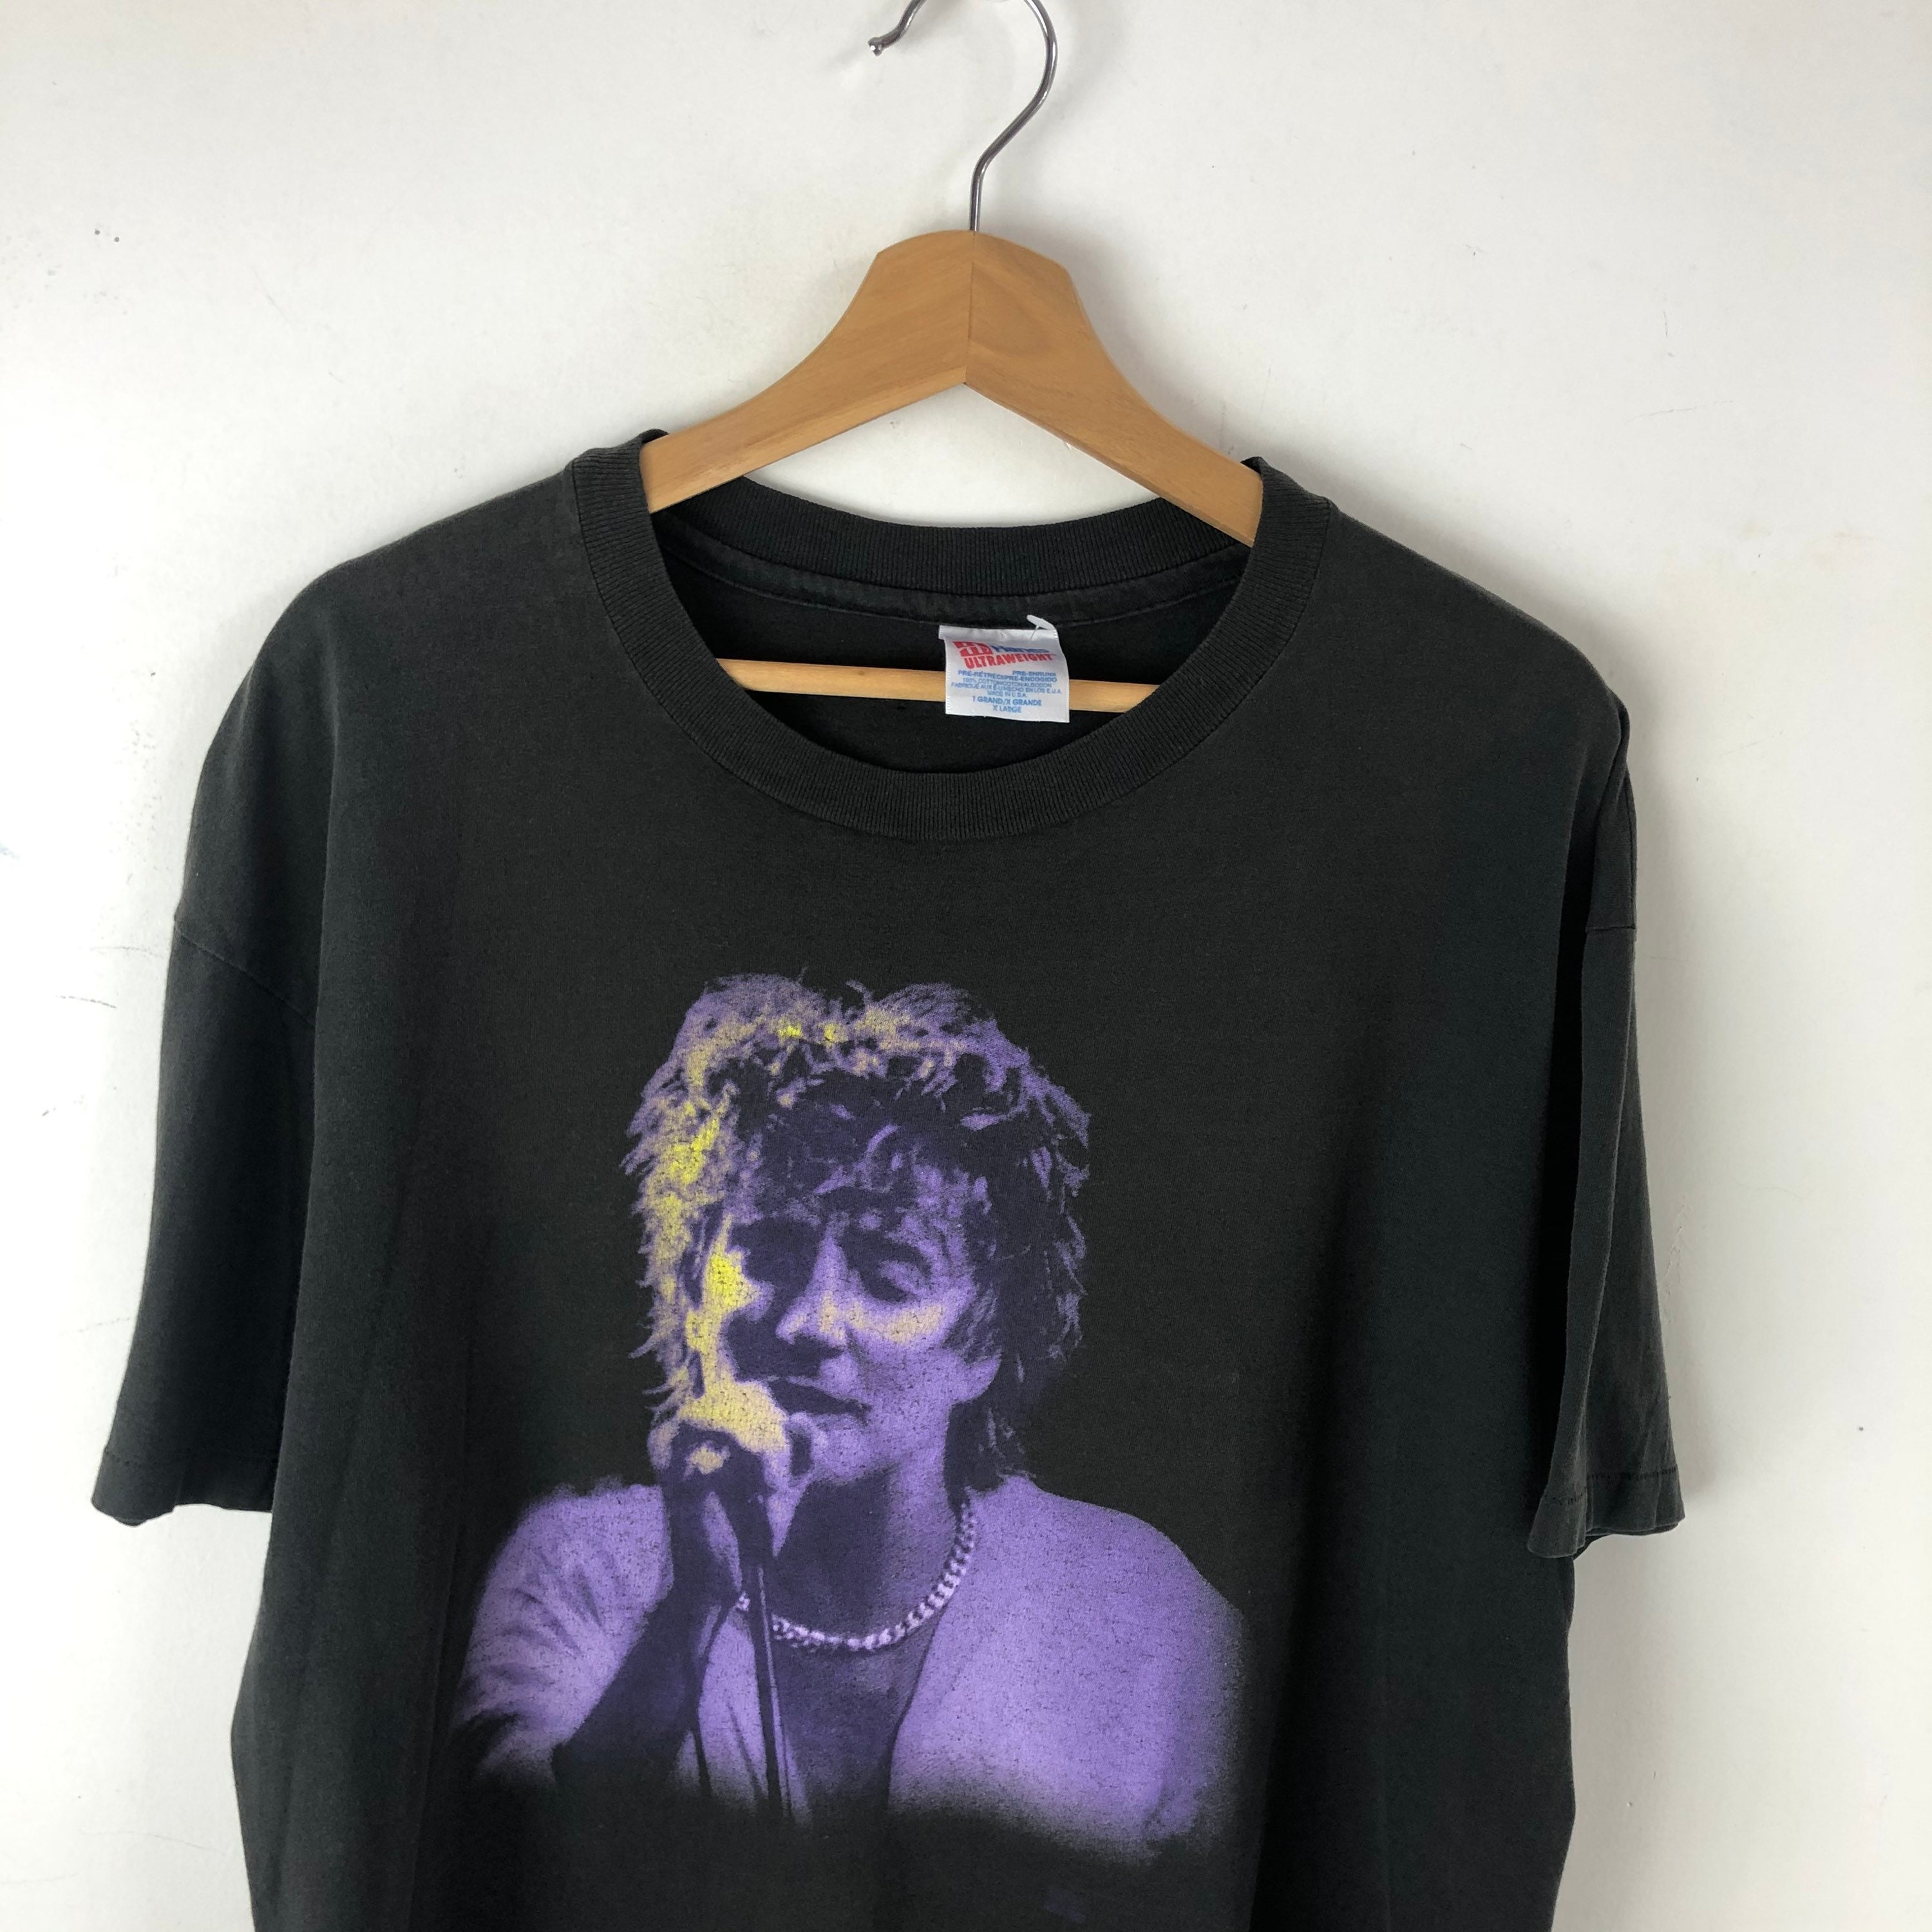 Vintage 90s Rod Stewart Shirt / Unplugged and Much More / - Etsy